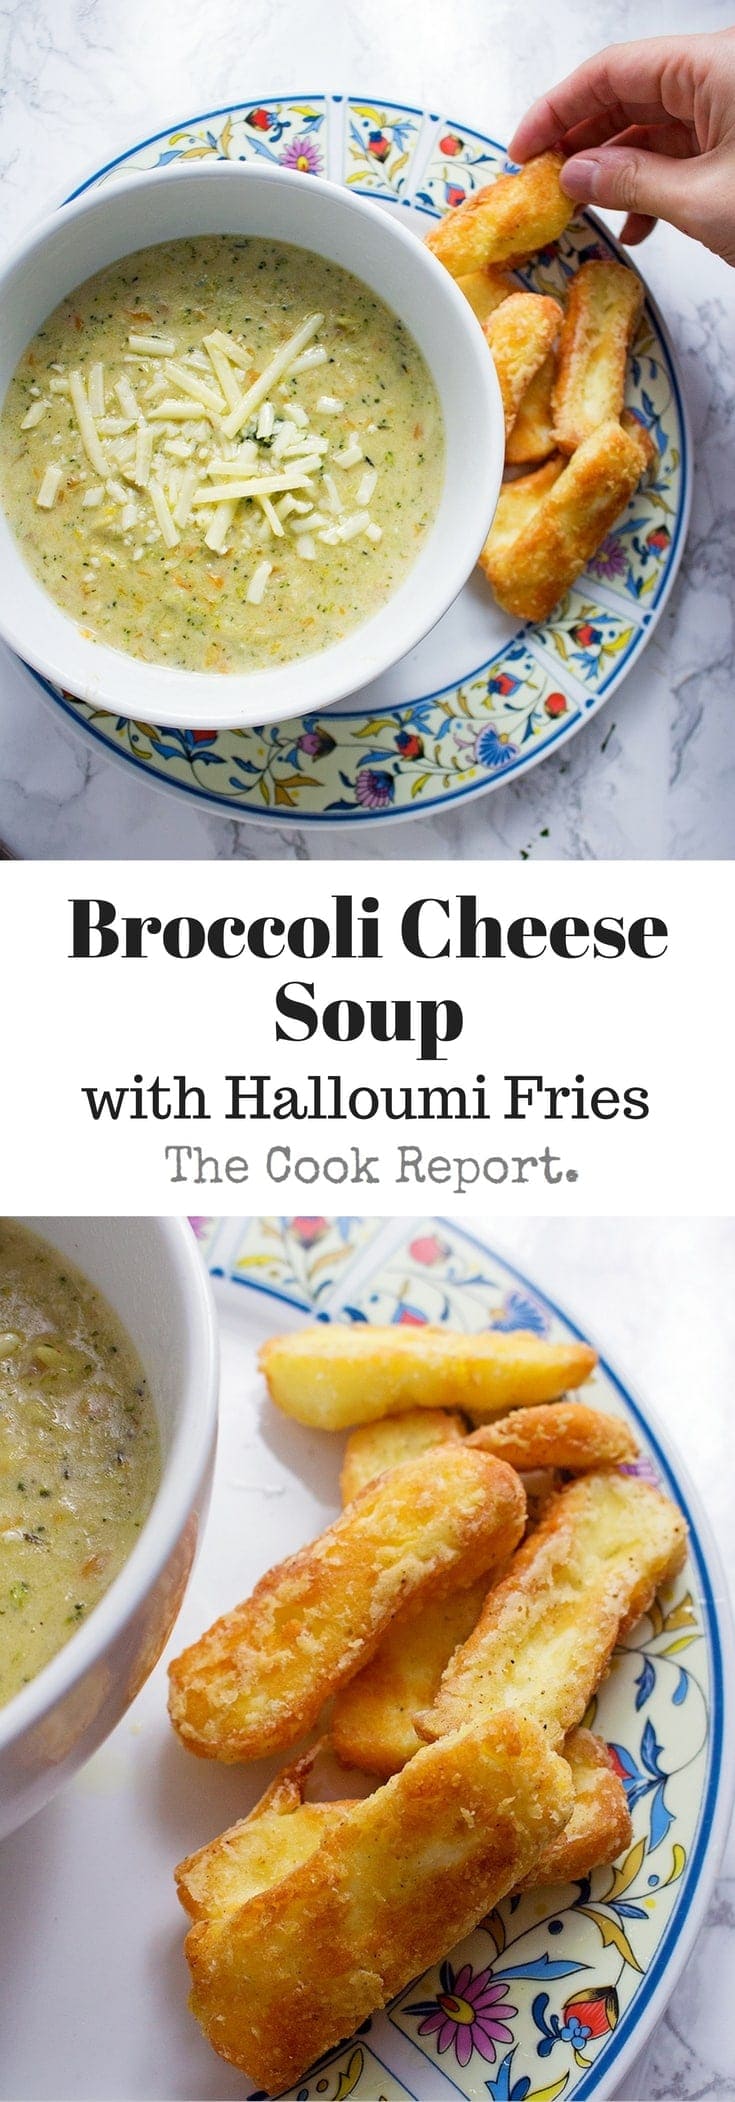 Can you ever have too much cheese? These crispy halloumi fries are the perfect thing to dip into this indulgent broccoli cheese soup.